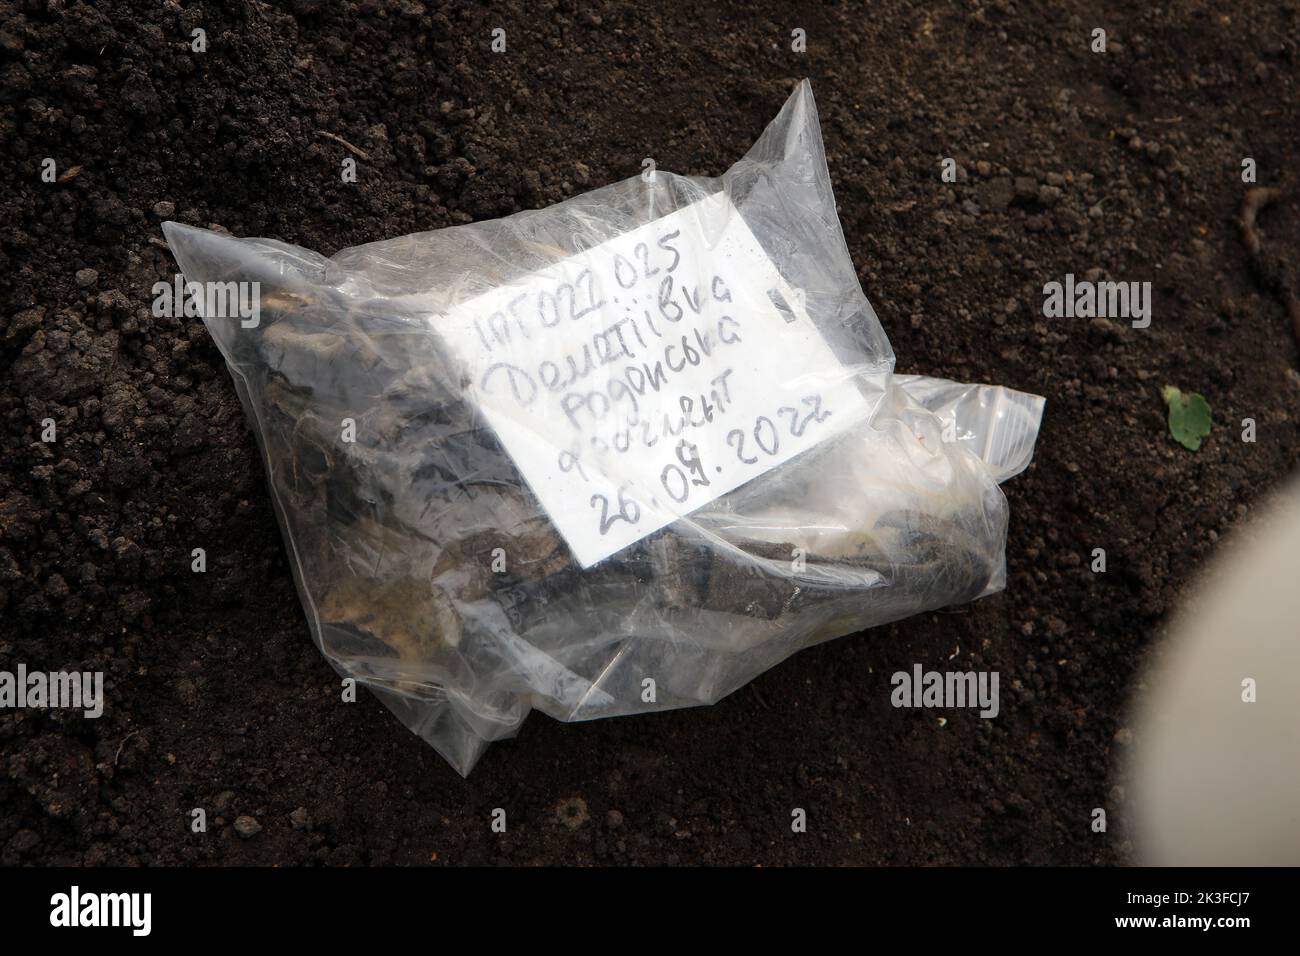 KHARKIV REGION, UKRAINE - SEPTEMBER 26, 2022 - Bone fragments found during the exhumation of the bodies of Ukrainian soldiers killed in action in the village of Dementiyivka recently liberated from russian, in the north of Kharkiv Region, north-eastern Ukraine. Stock Photo